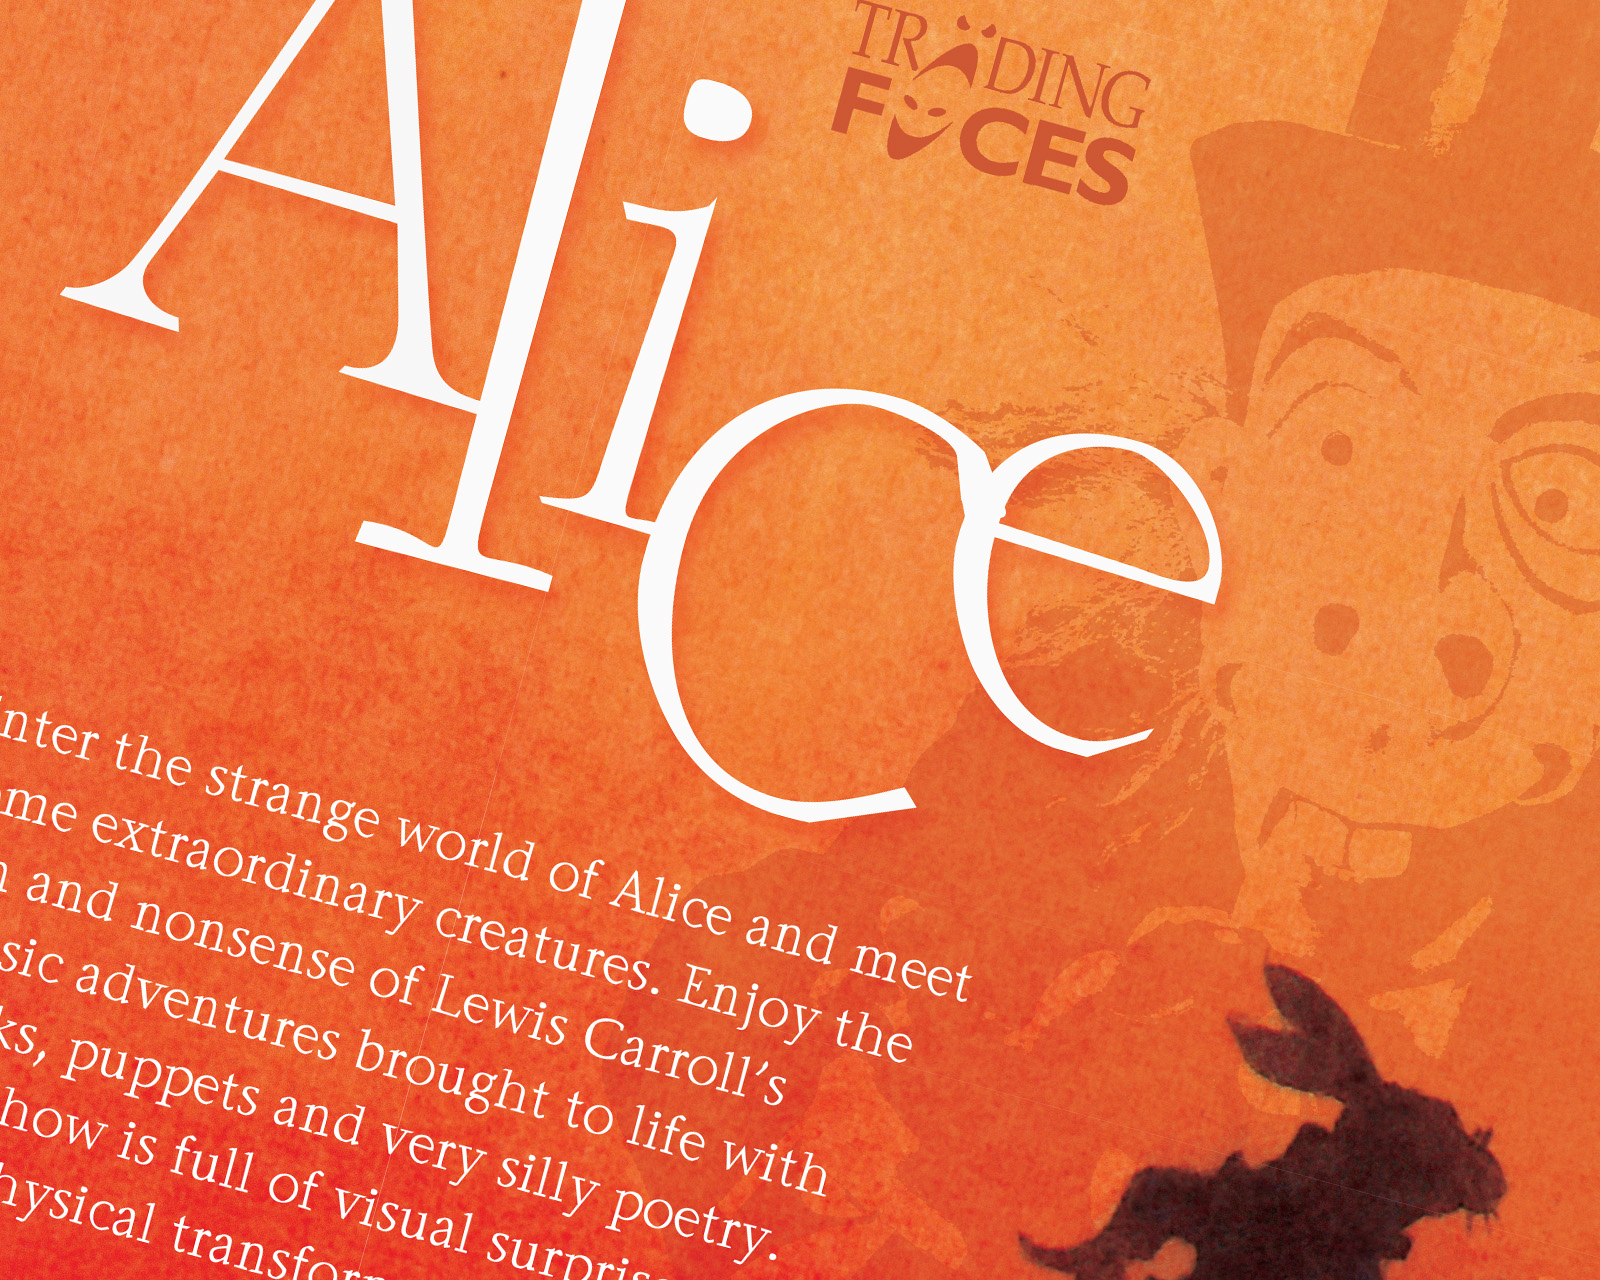 Trading Faces Alice Poster